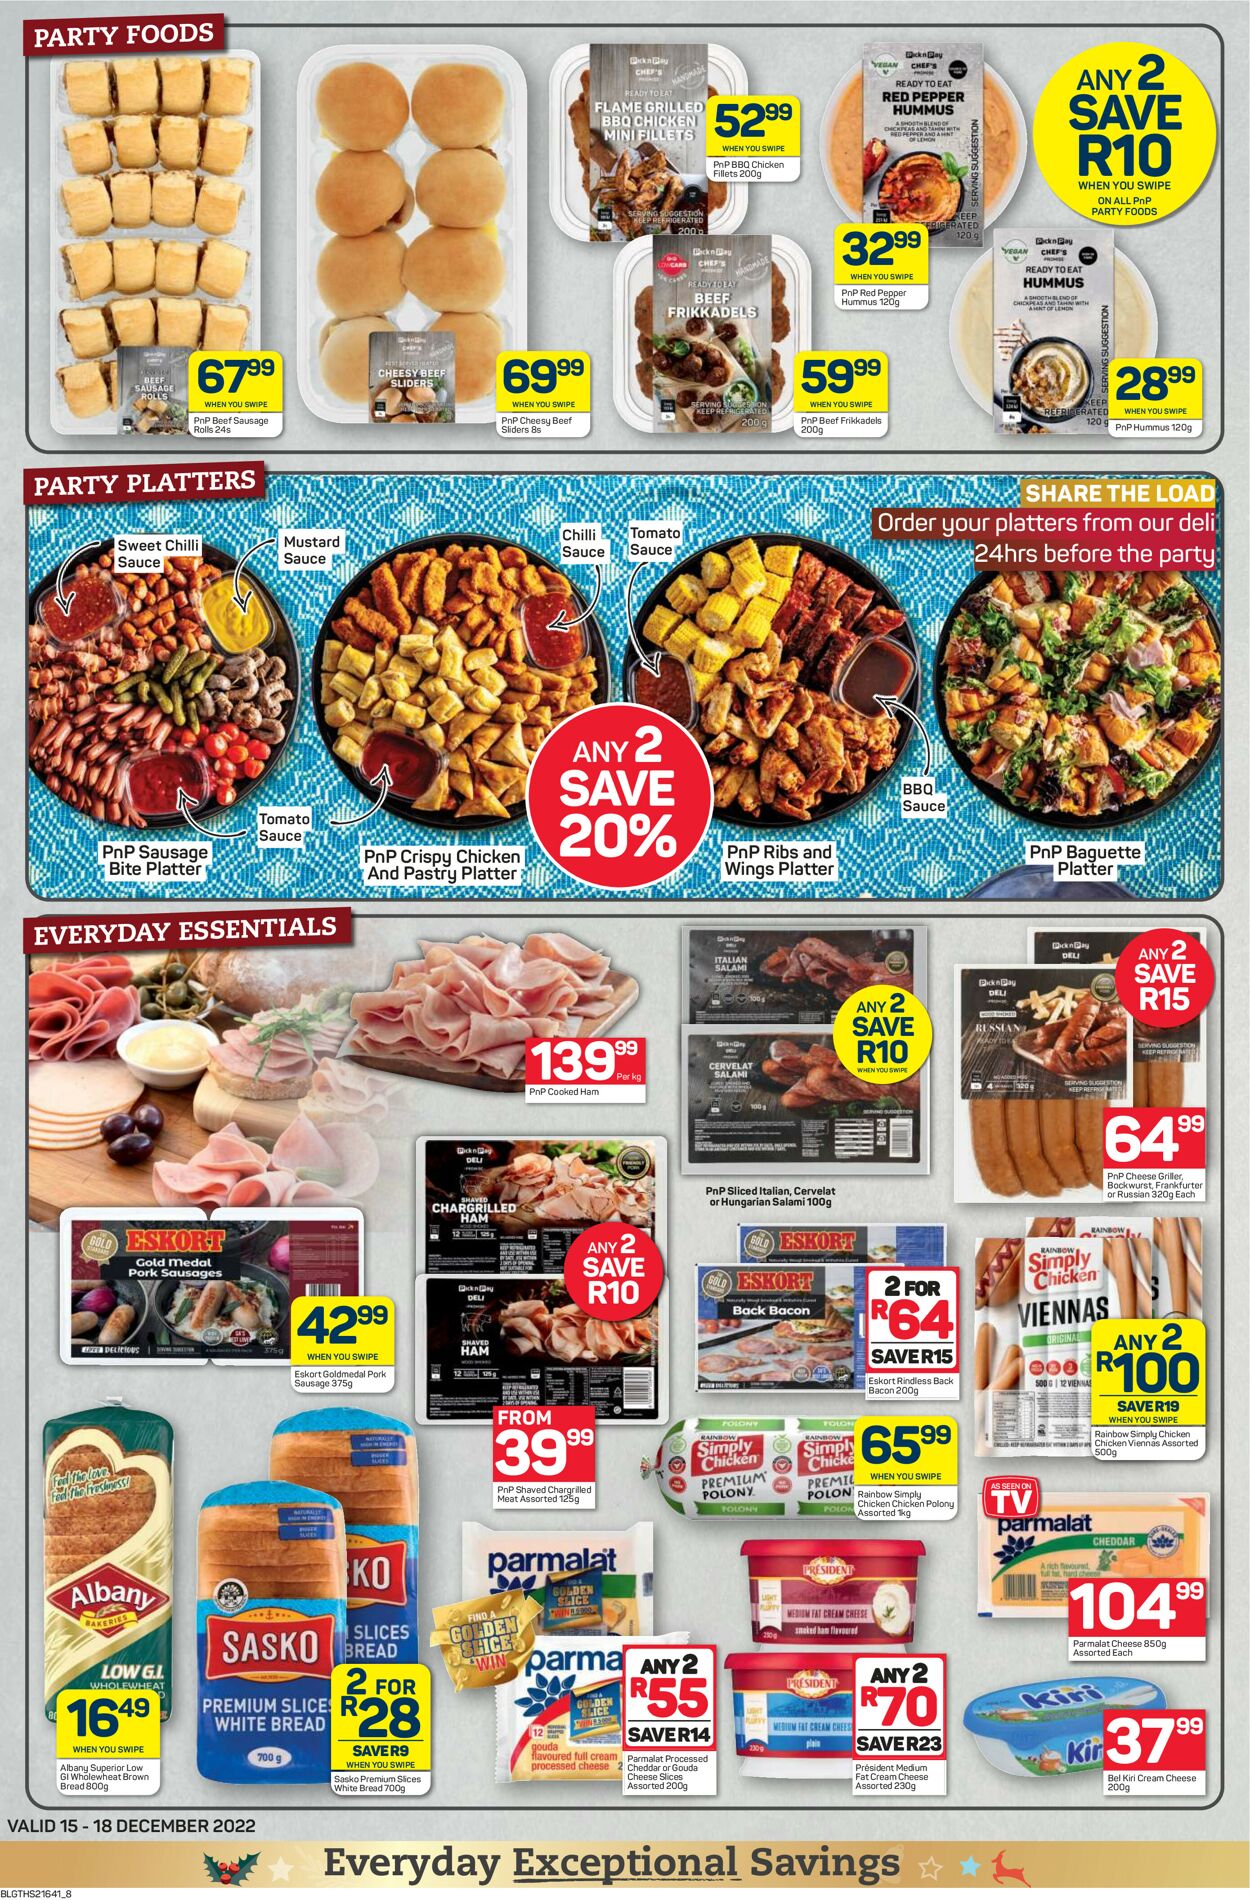 Pick n Pay Catalogue - 2022/12/15-2022/12/18 (Page 8)